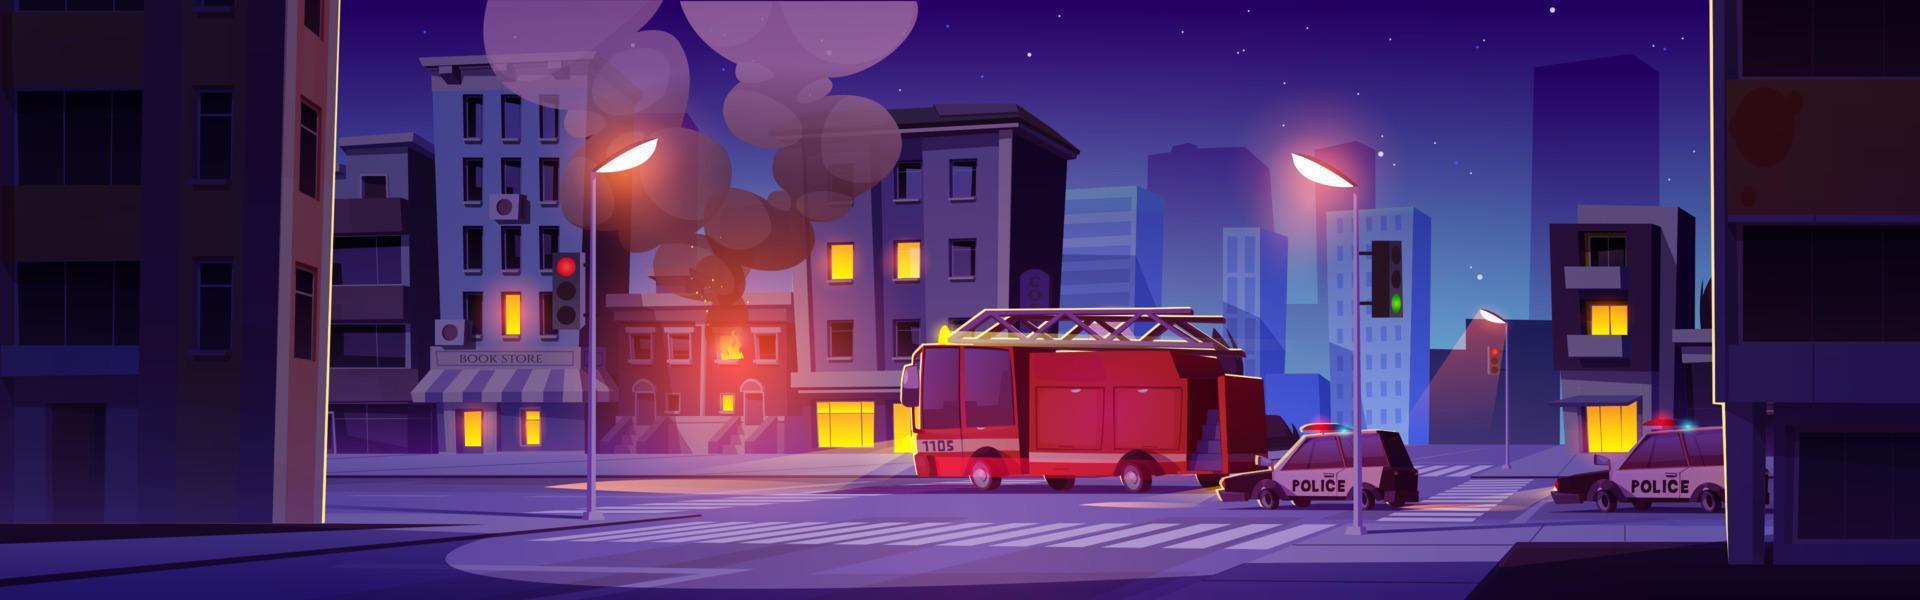 Fire in house and firefighter truck at night vector